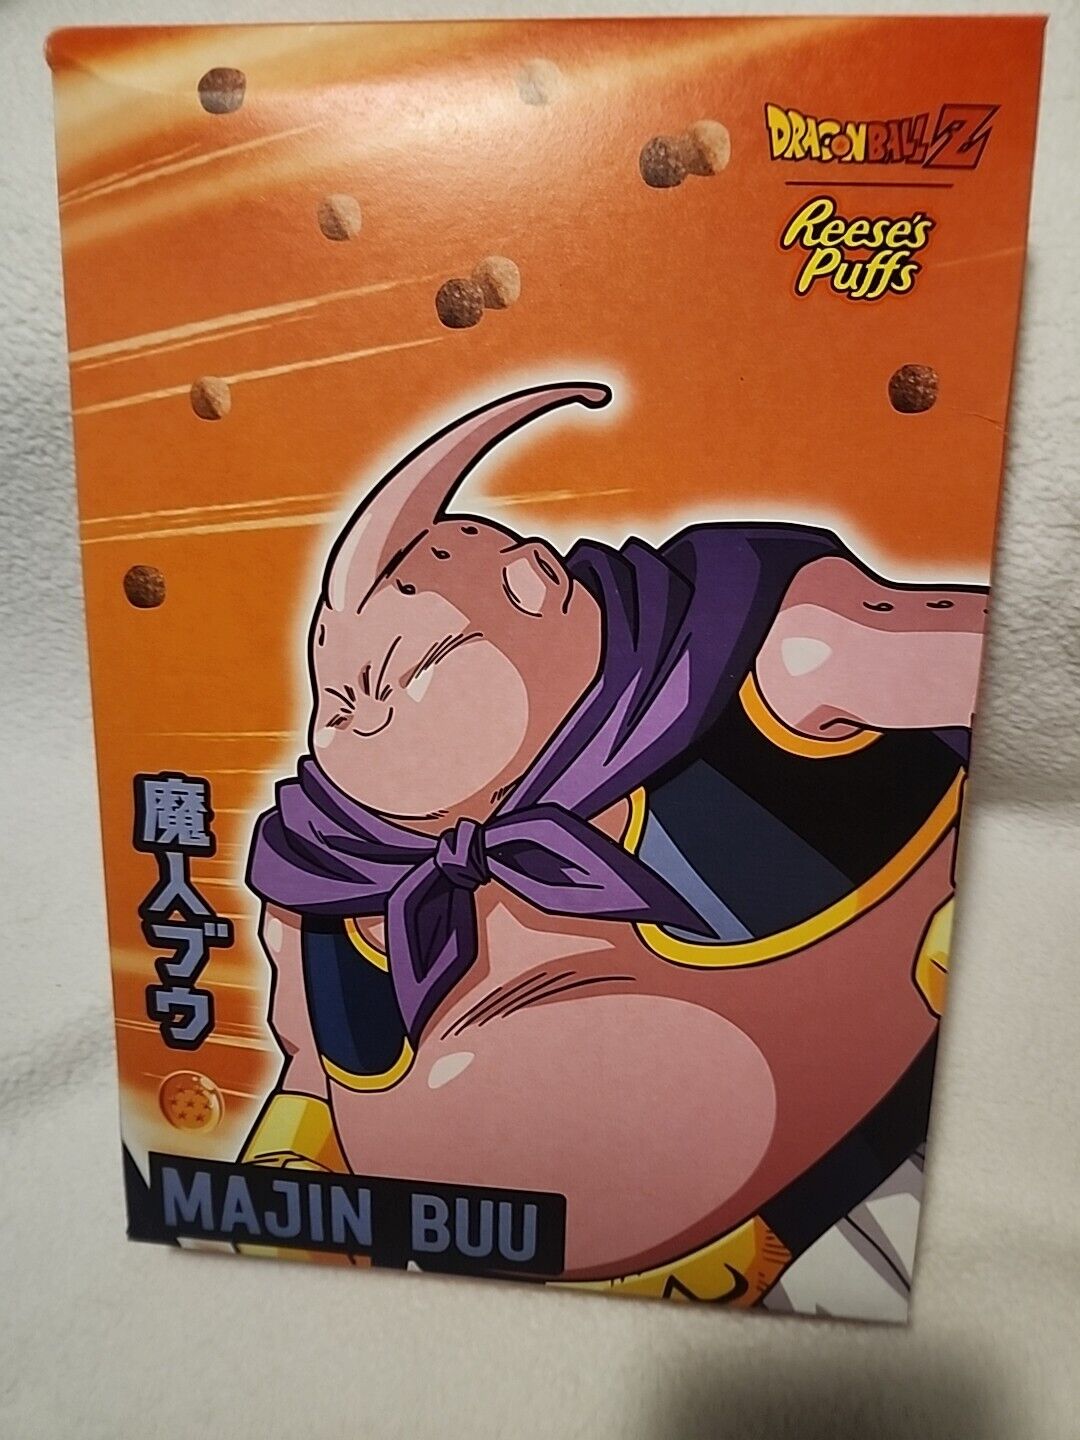 Limited Edition Dragon Ball Z Reese’s Puffs Family Size - Majin Buu (New) Reese's Puff